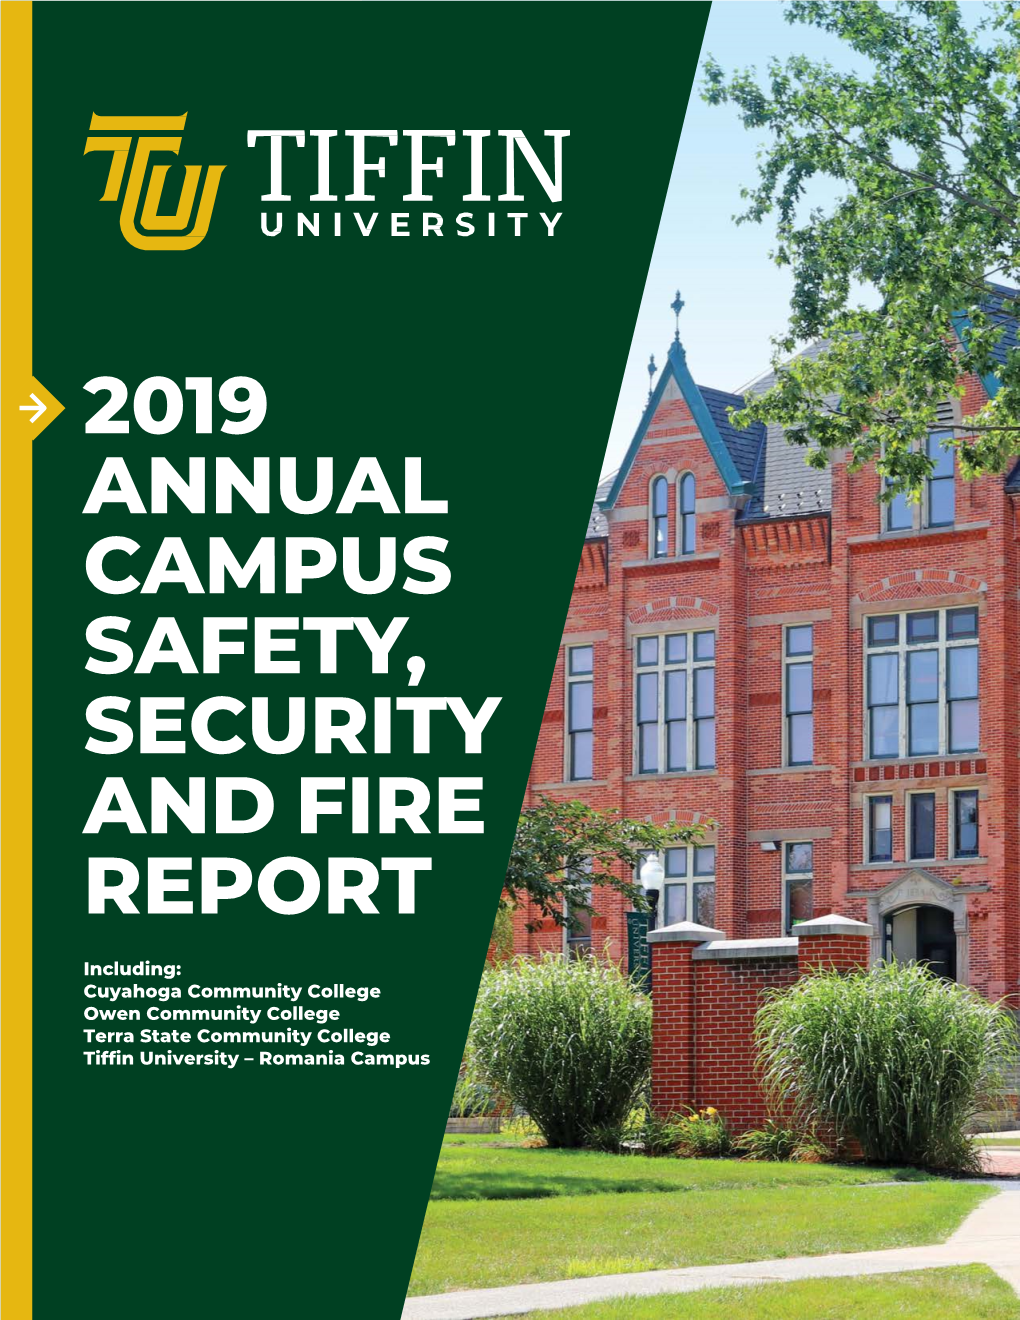 2019 Annual Campus Safety, Security and Fire Report